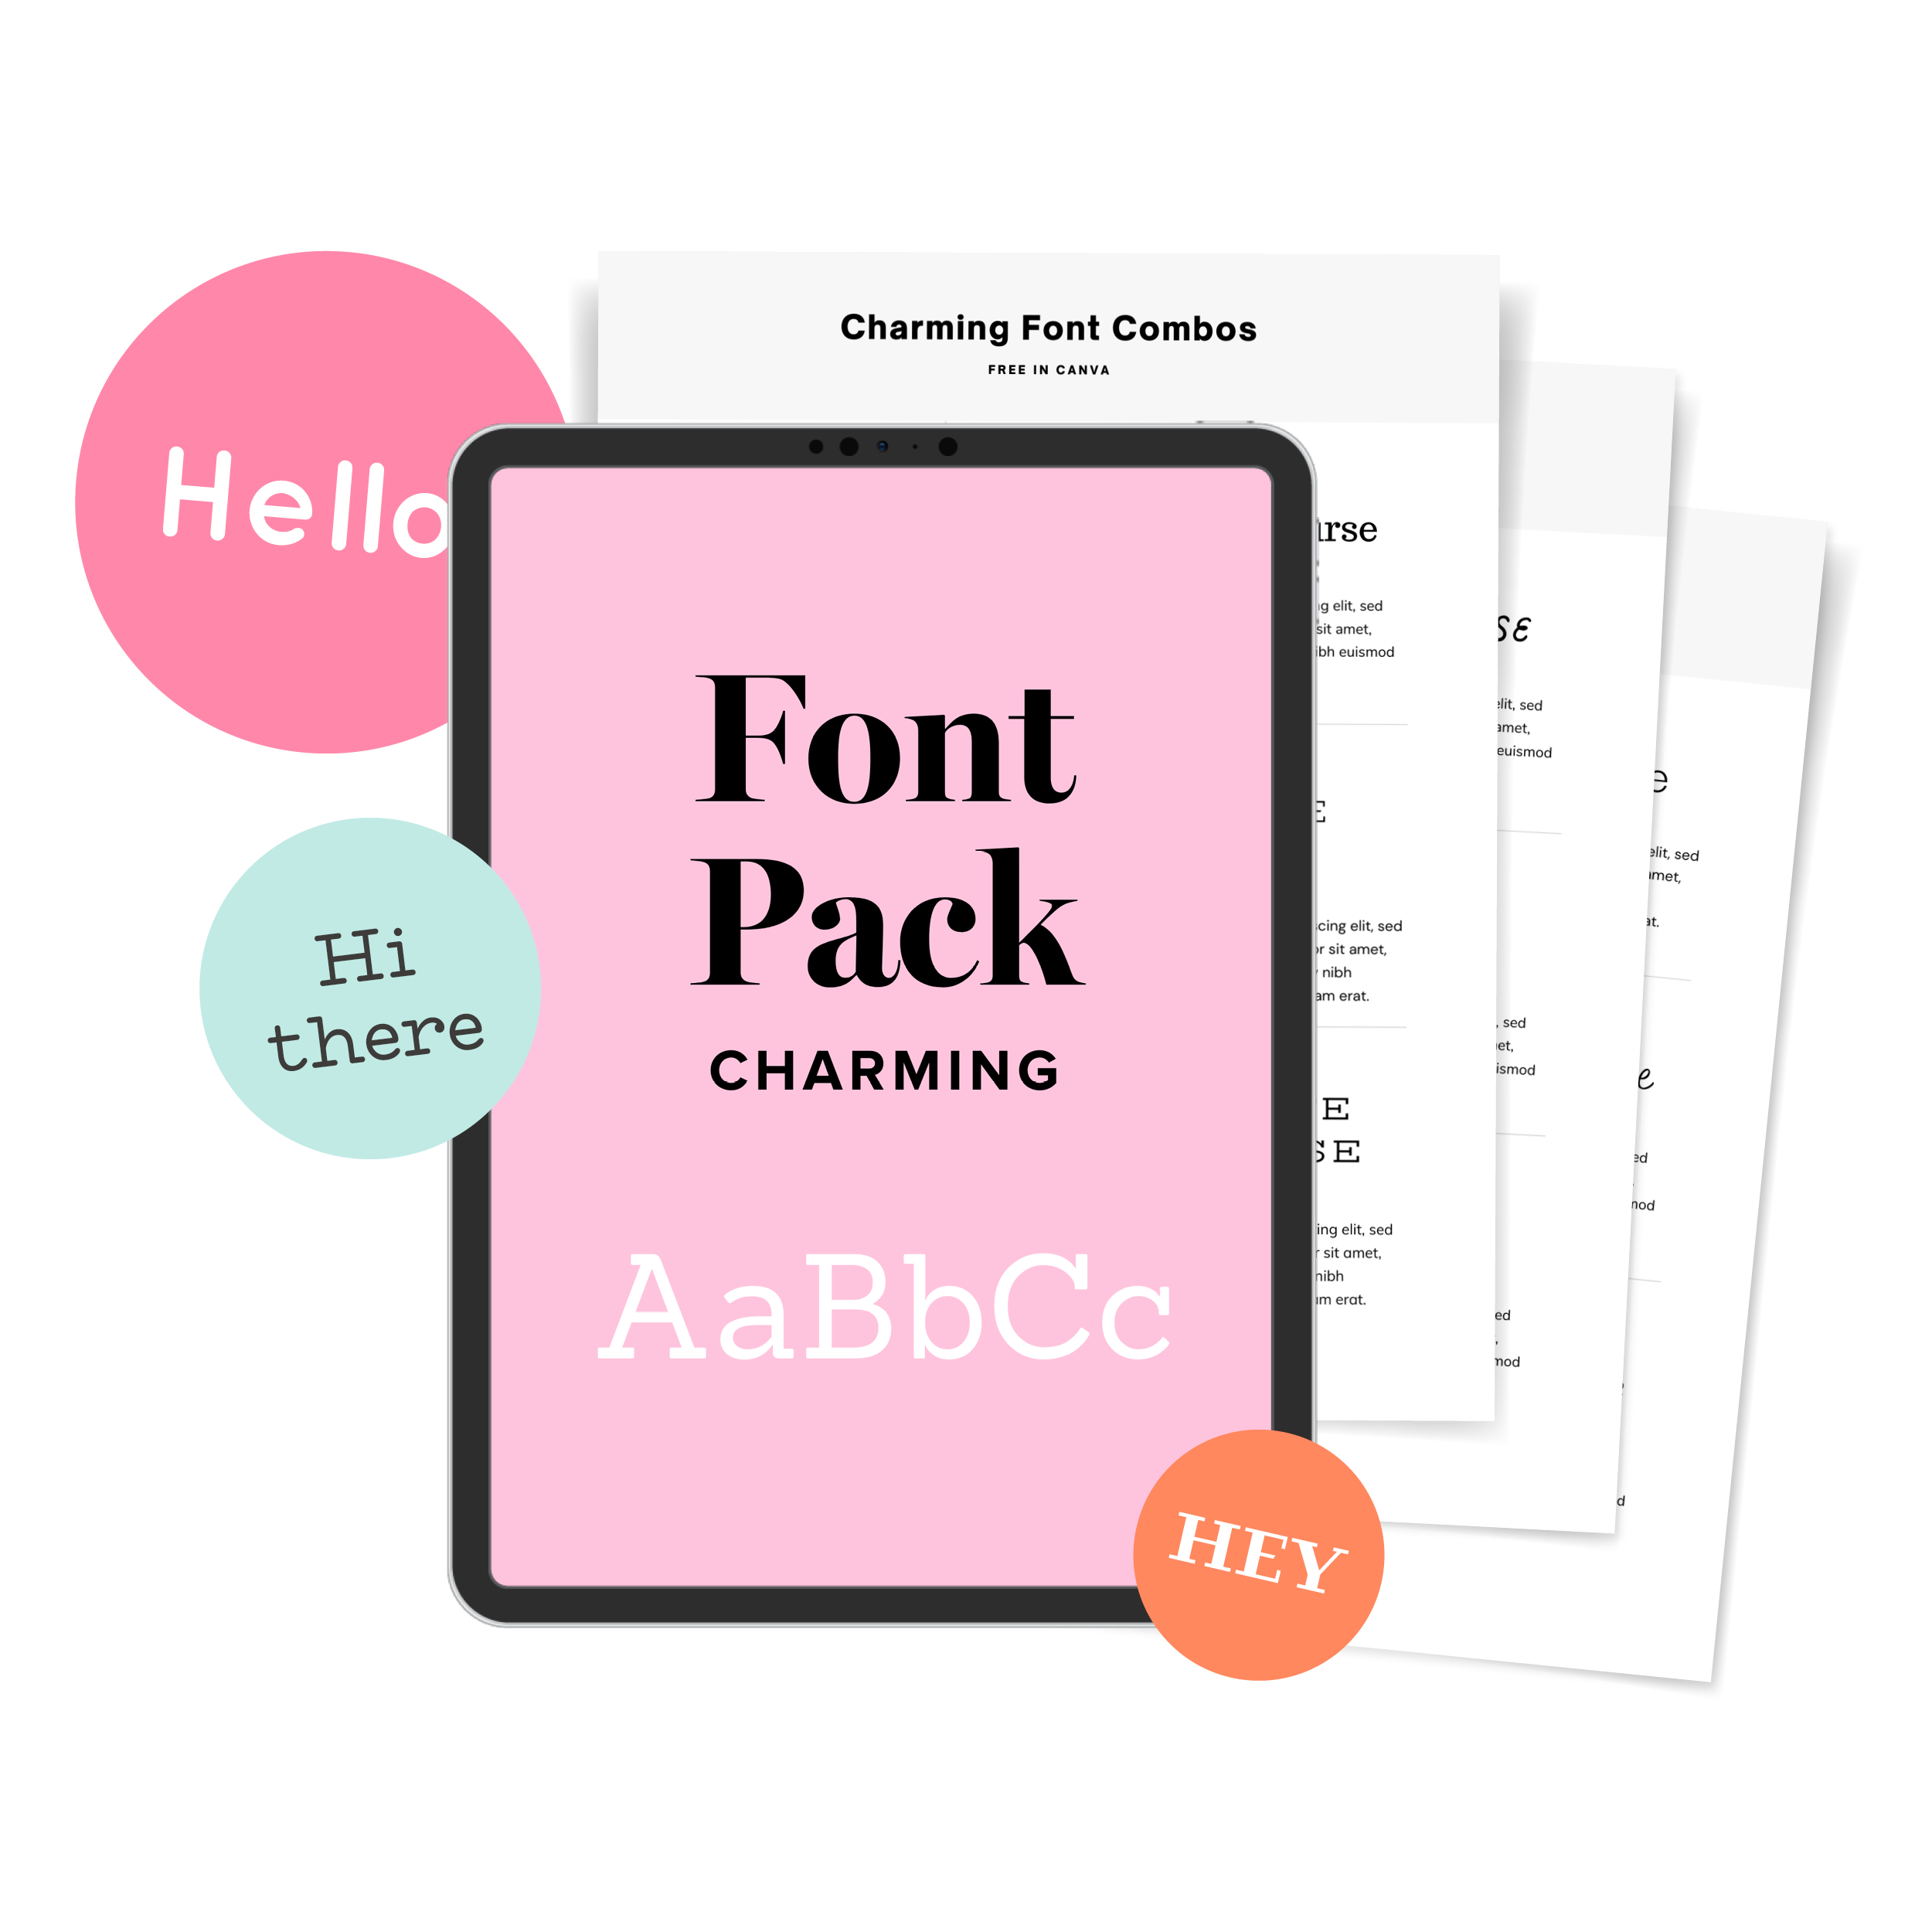 Font Pack - Charming